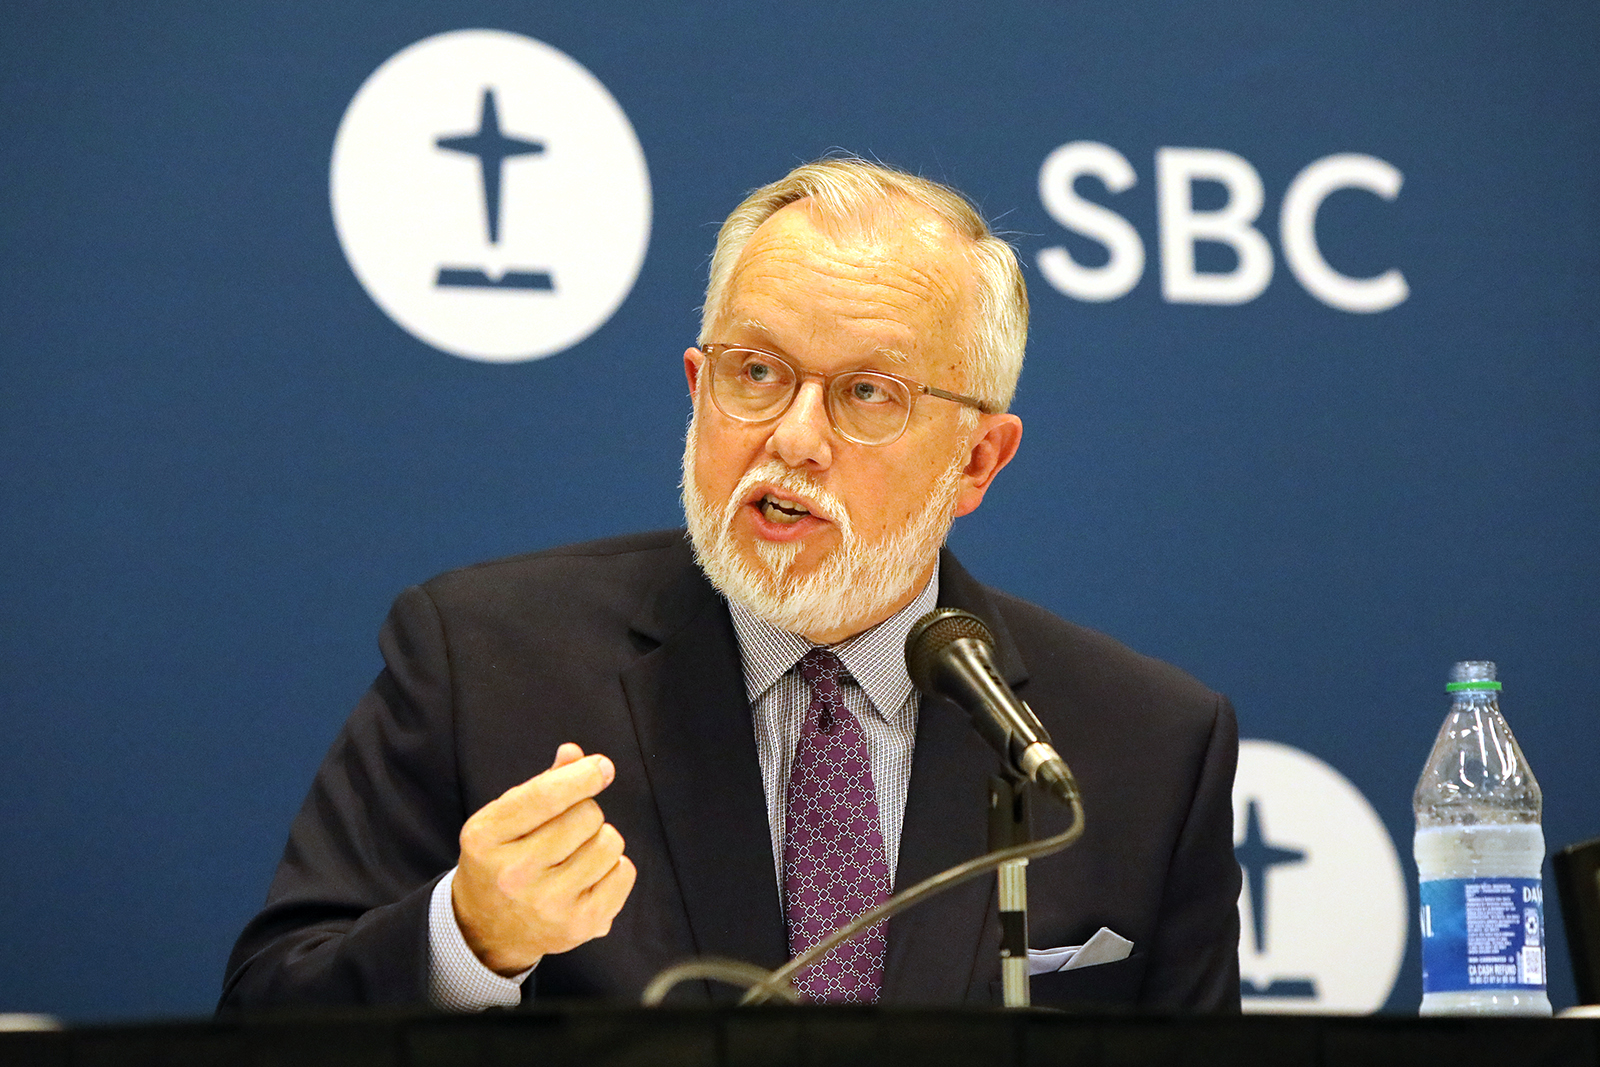 The Rev. Ed Litton speaks during a news conference after his election as the next president of the Southern Baptist Convention, June 15, 2021, in Nashville, Tennessee. RNS photo by Kit Doyle